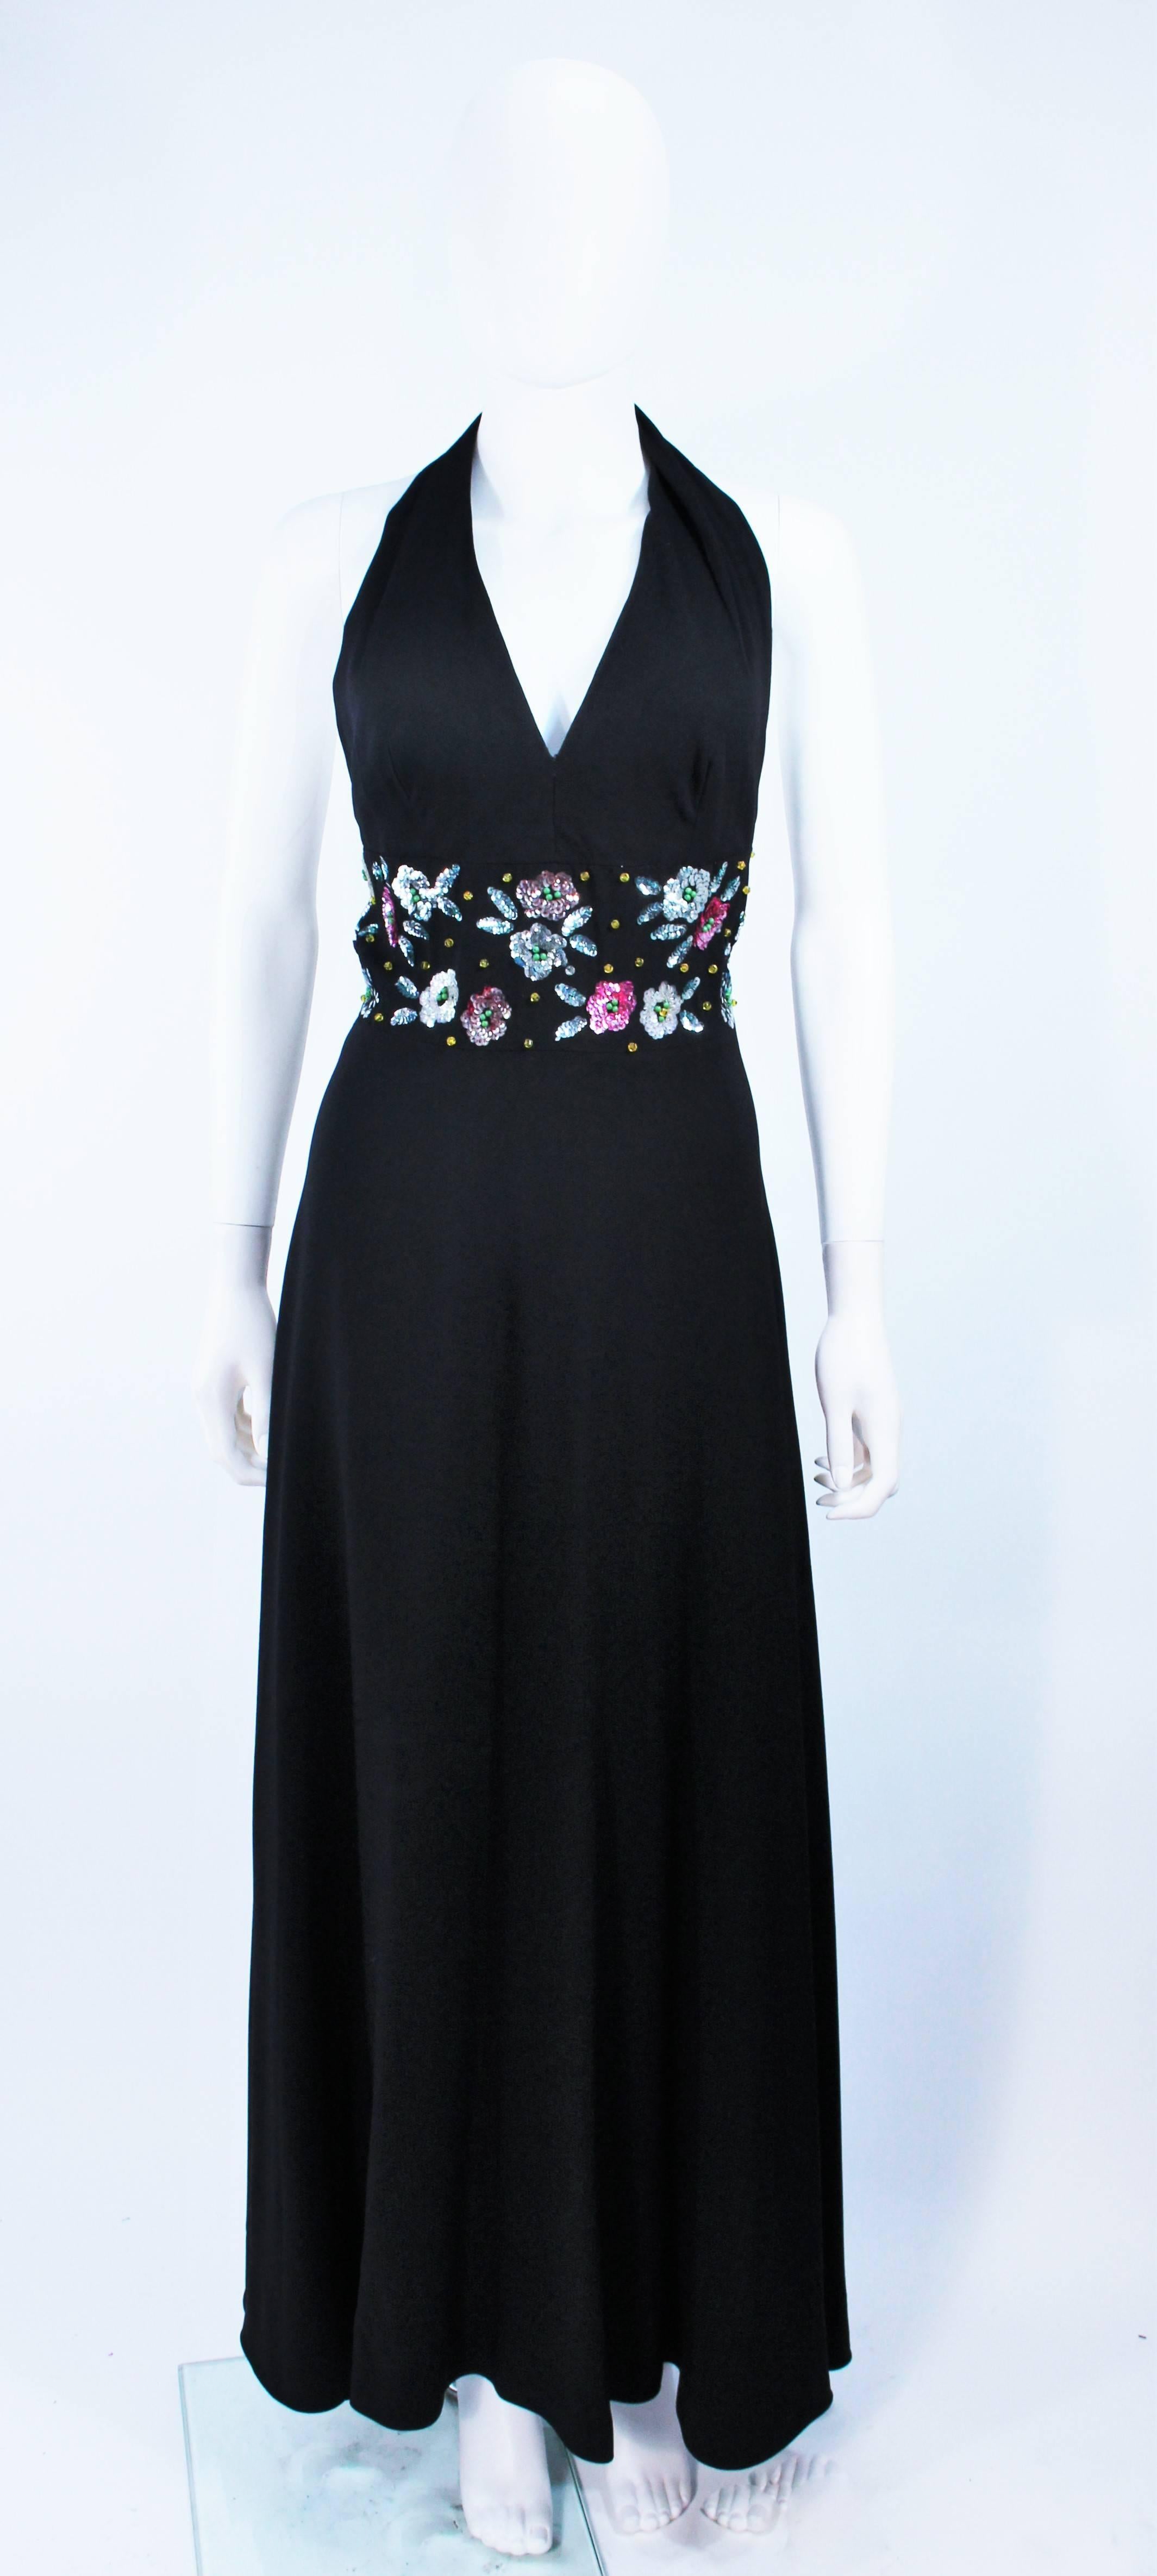  This gown is composed of a a black crepe with an embellished waist detail, featuring a floral sequin and rhinestone applique. There is a center back zipper closure. In excellent vintage condition.

  **Please cross-reference measurements for